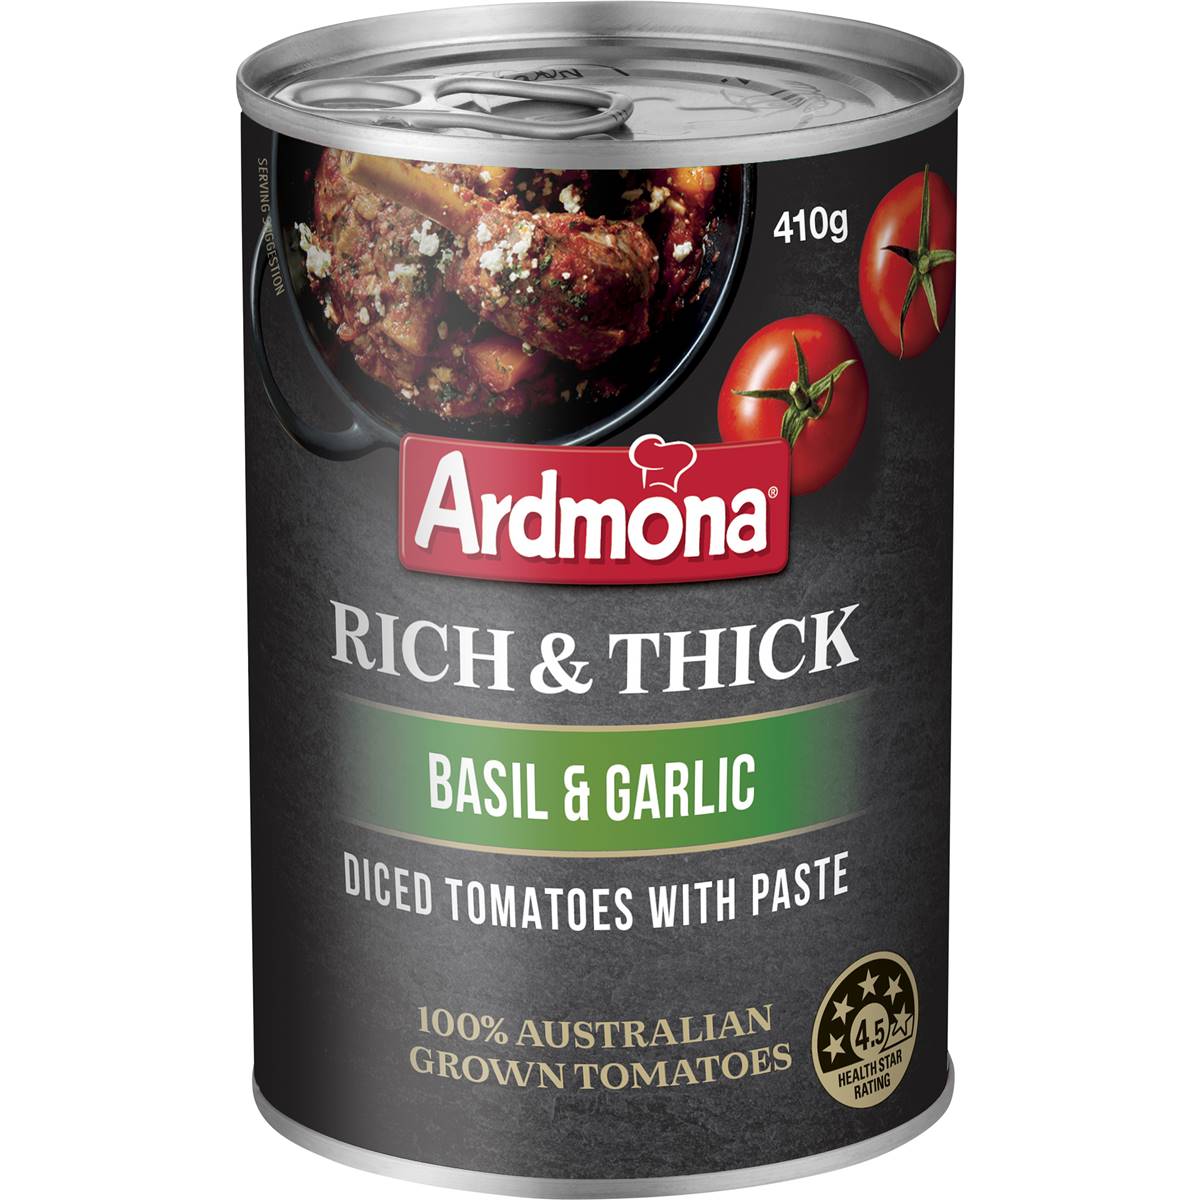 Ardmona Rich & Thick Diced Tomatoes With Paste Basil & Garlic 410g